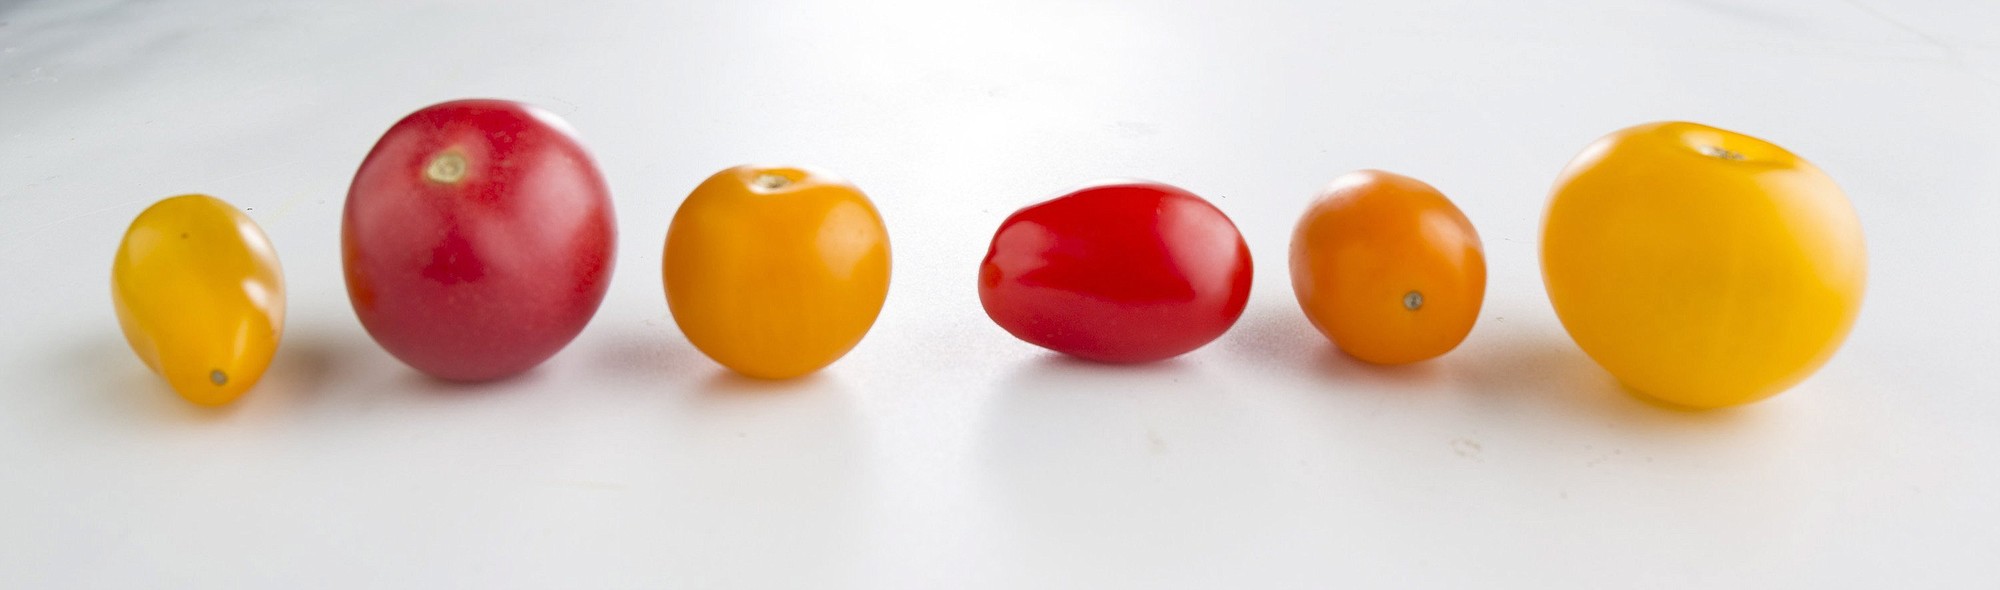 Cherry and grape tomato varieties do vary by color, shape, flavor, aroma and taste.